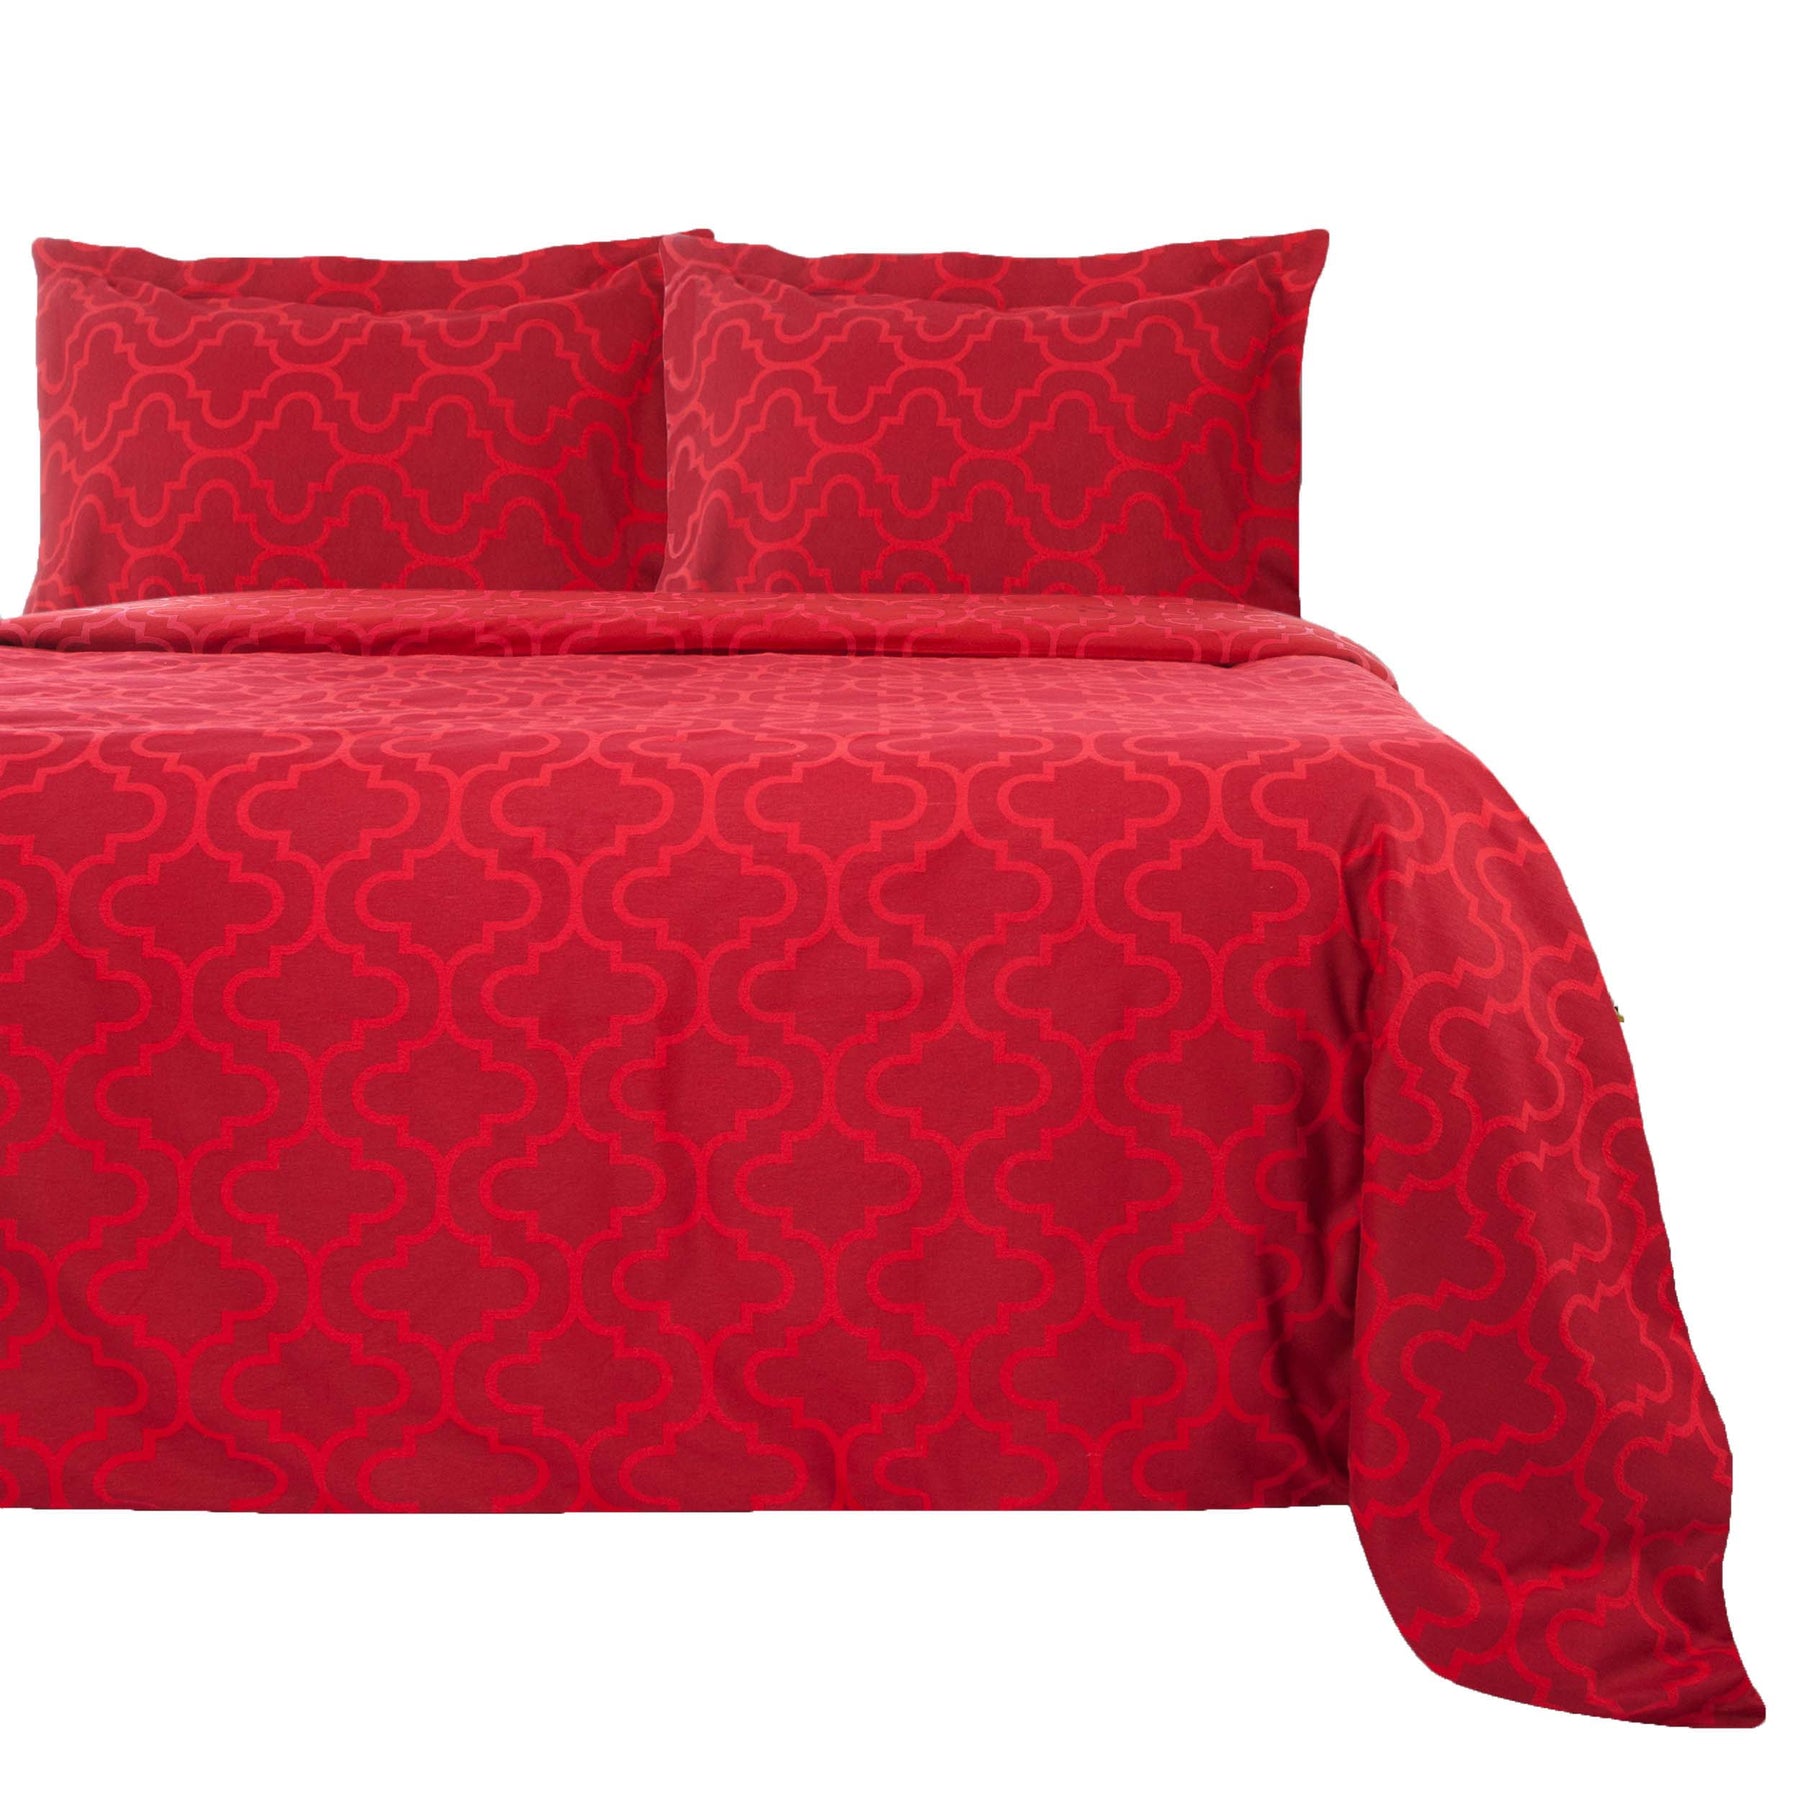 Superior Cotton Flannel Solid or Trellis Heavyweight and Breathable Duvet Cover Set with Button Closure - Burgundy	